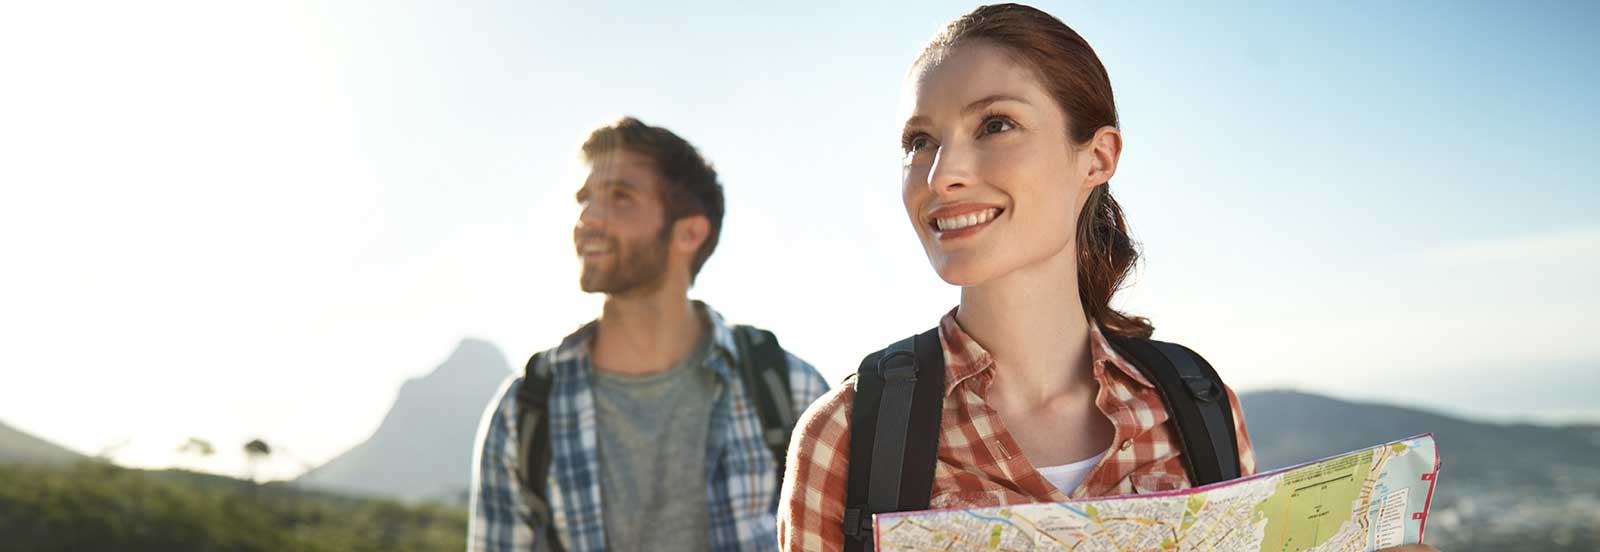 A couple hiking outdoors. The woman leads with the map. -1600x552.jpg